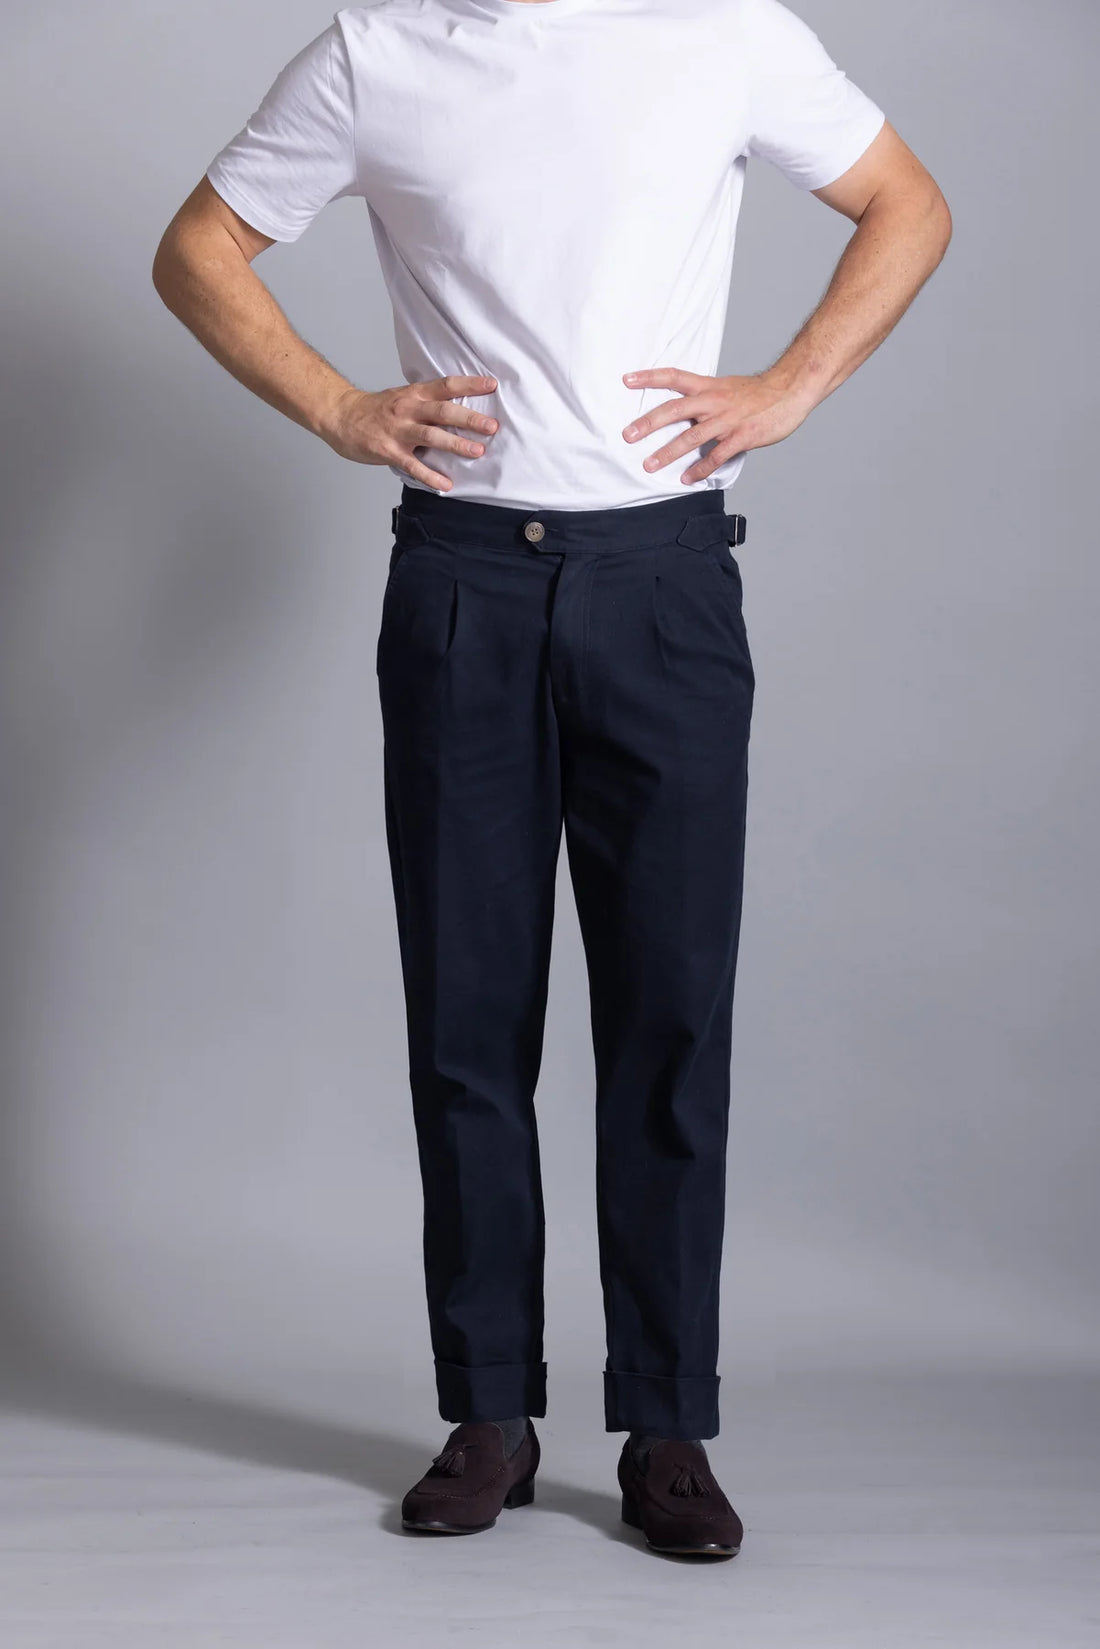 Cutler & Co Iggy Trousers | Thunderstorm